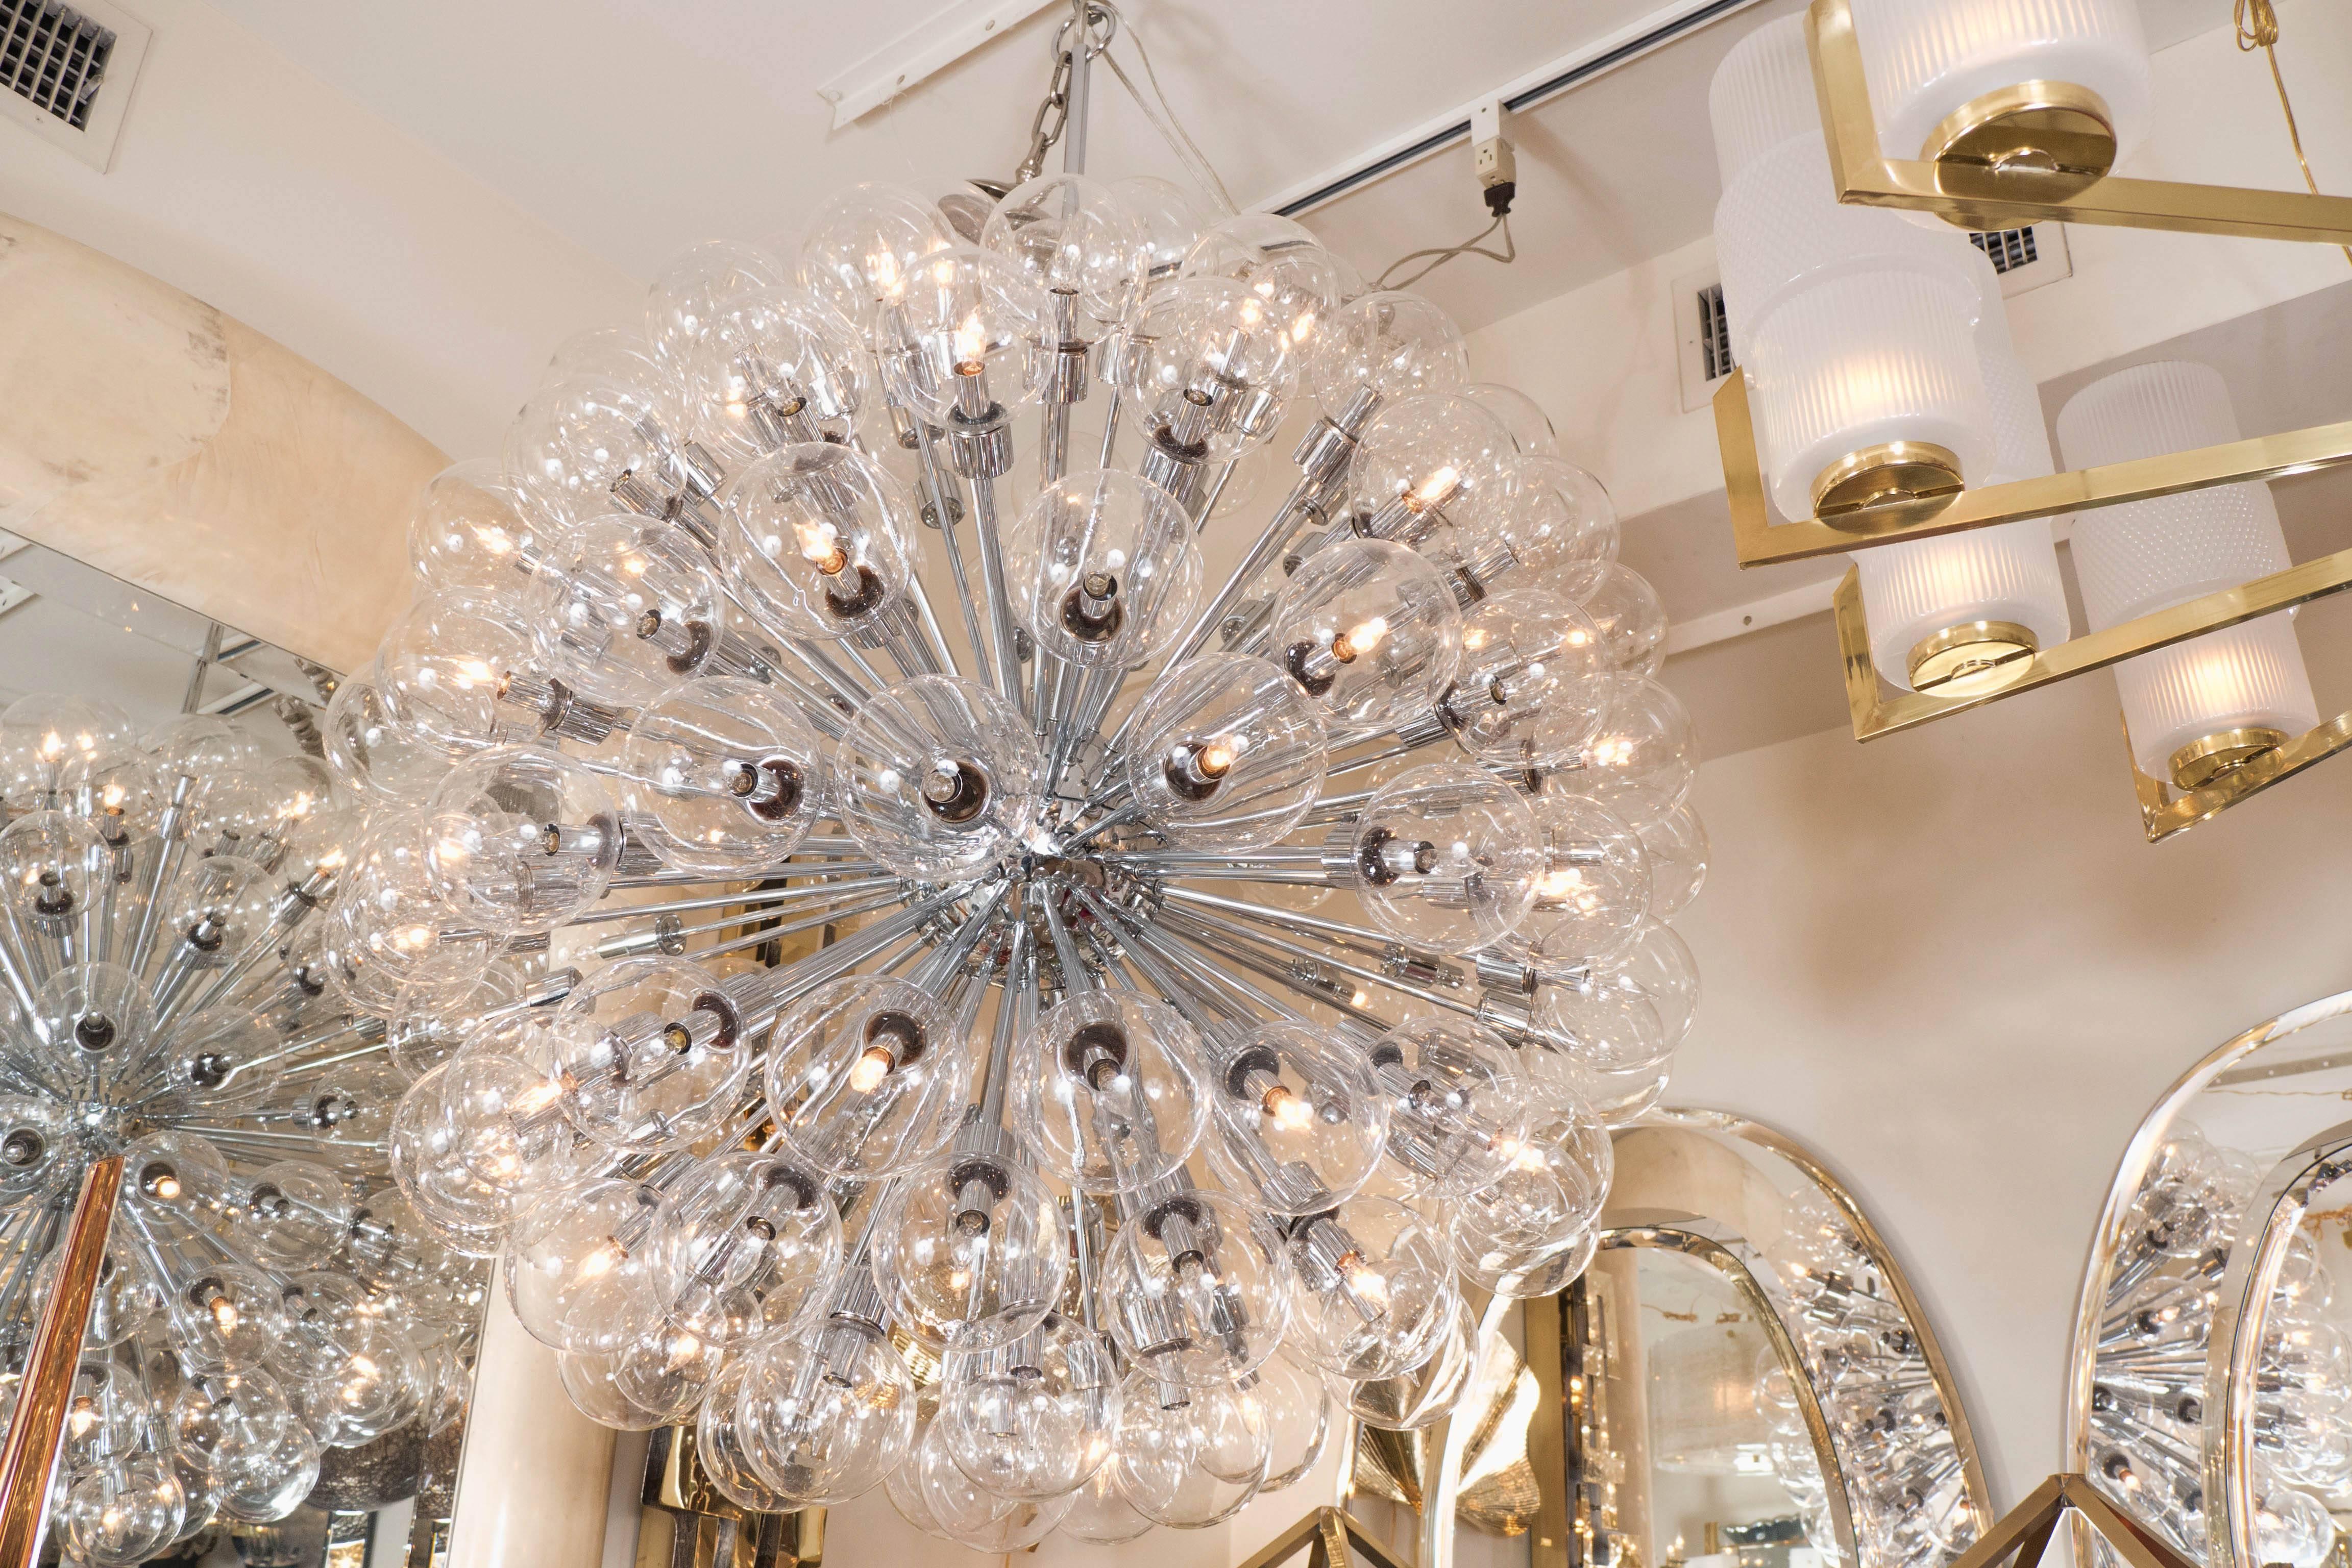 Monumental polished chrome Sputnik chandelier featuring spherical clear glass shades by Motoko Ishii for Staff Leuchten.
   